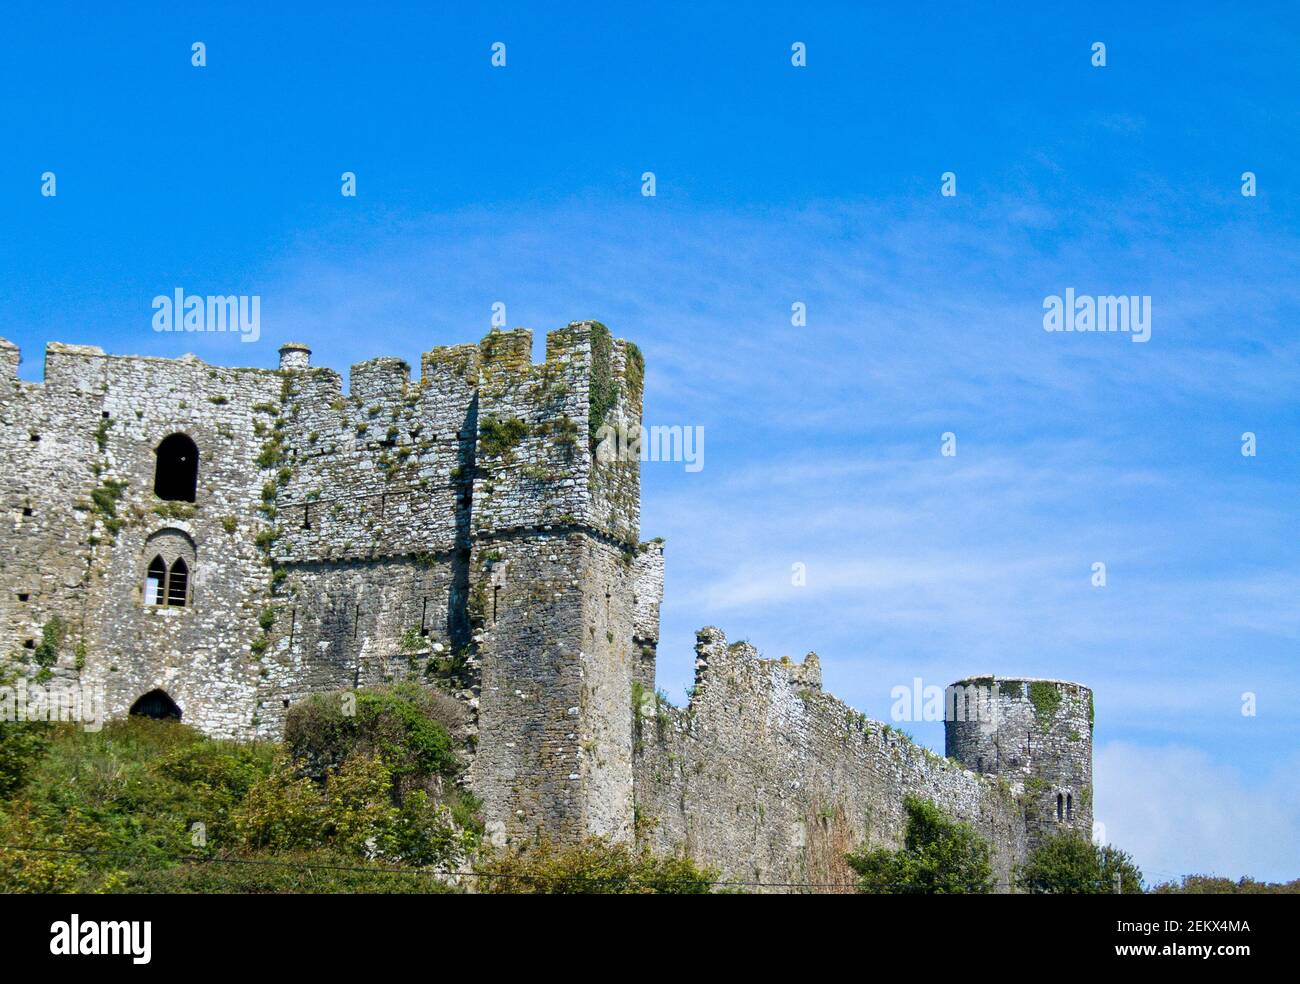 old, castle ruins, dilapidated castle, ancient, stone, medieval, fantasy, lore, king arthur, knights of the round table, grand castle, welsh castles Stock Photo